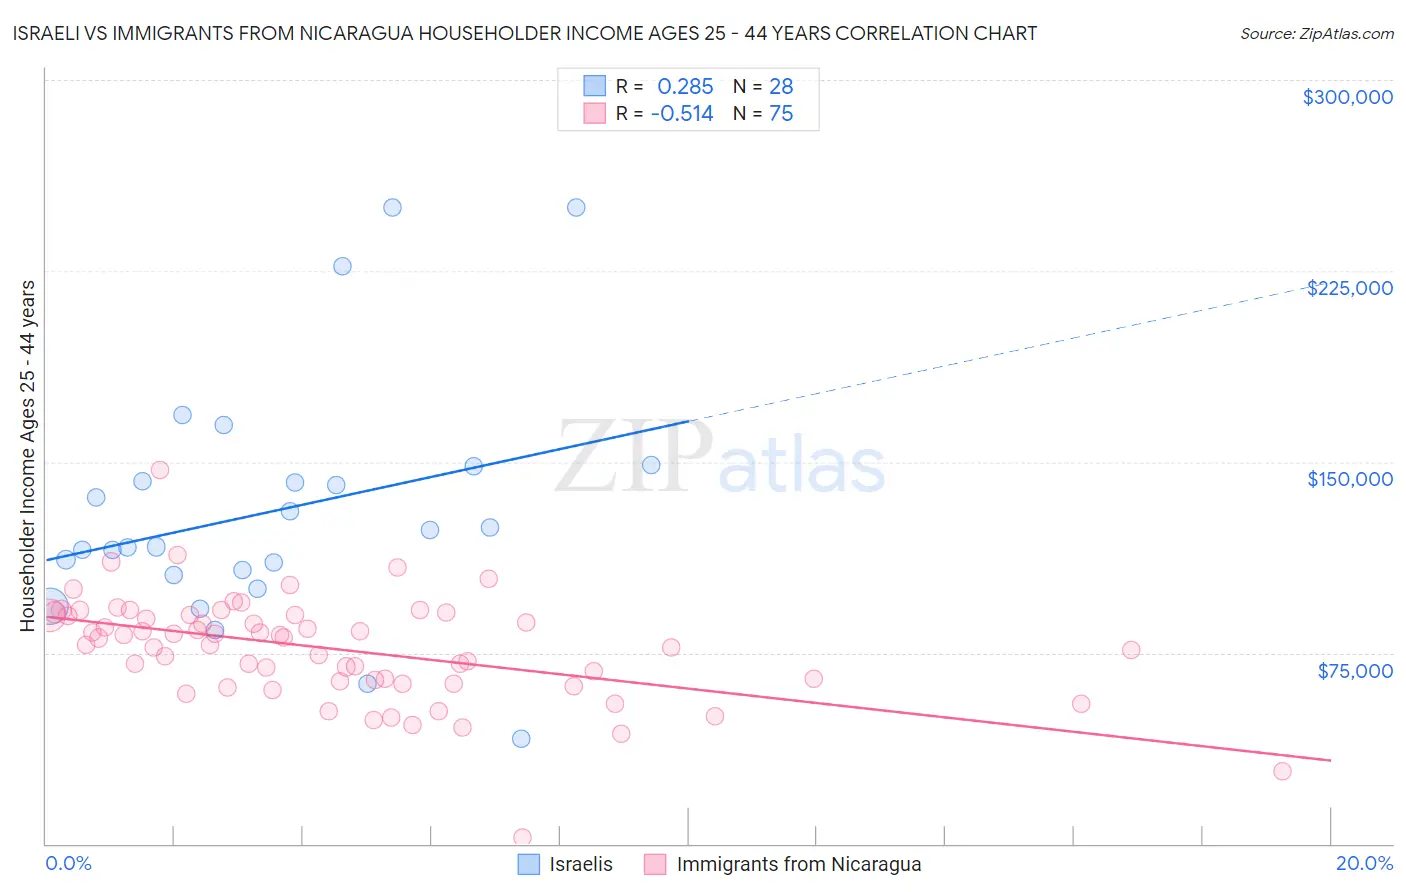 Israeli vs Immigrants from Nicaragua Householder Income Ages 25 - 44 years